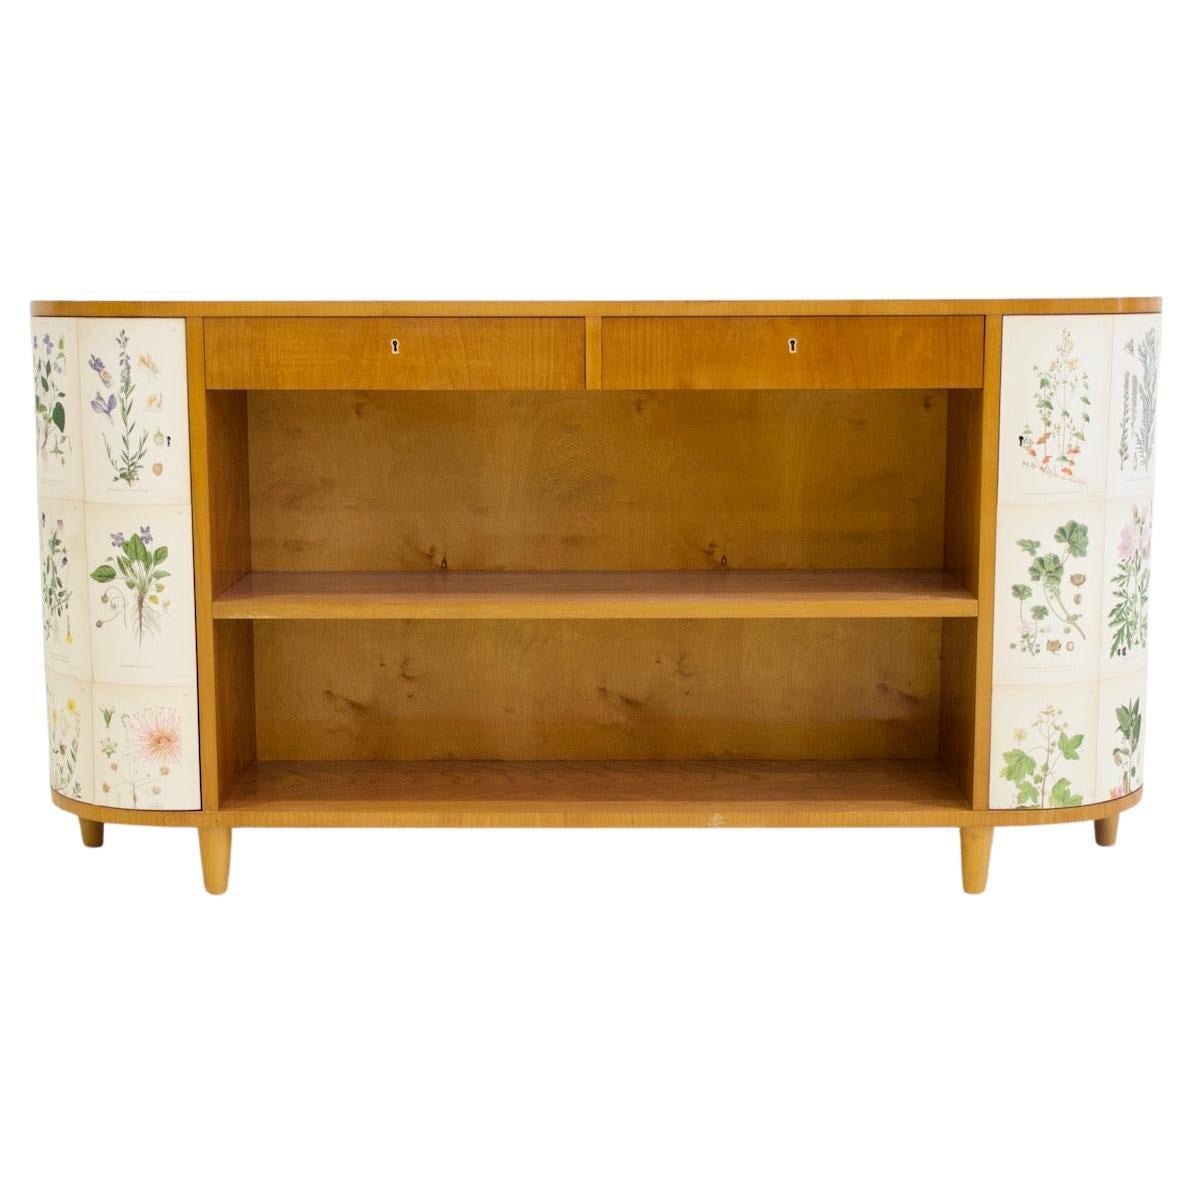 Elm Bookcase with Nordens Flora Illustrations